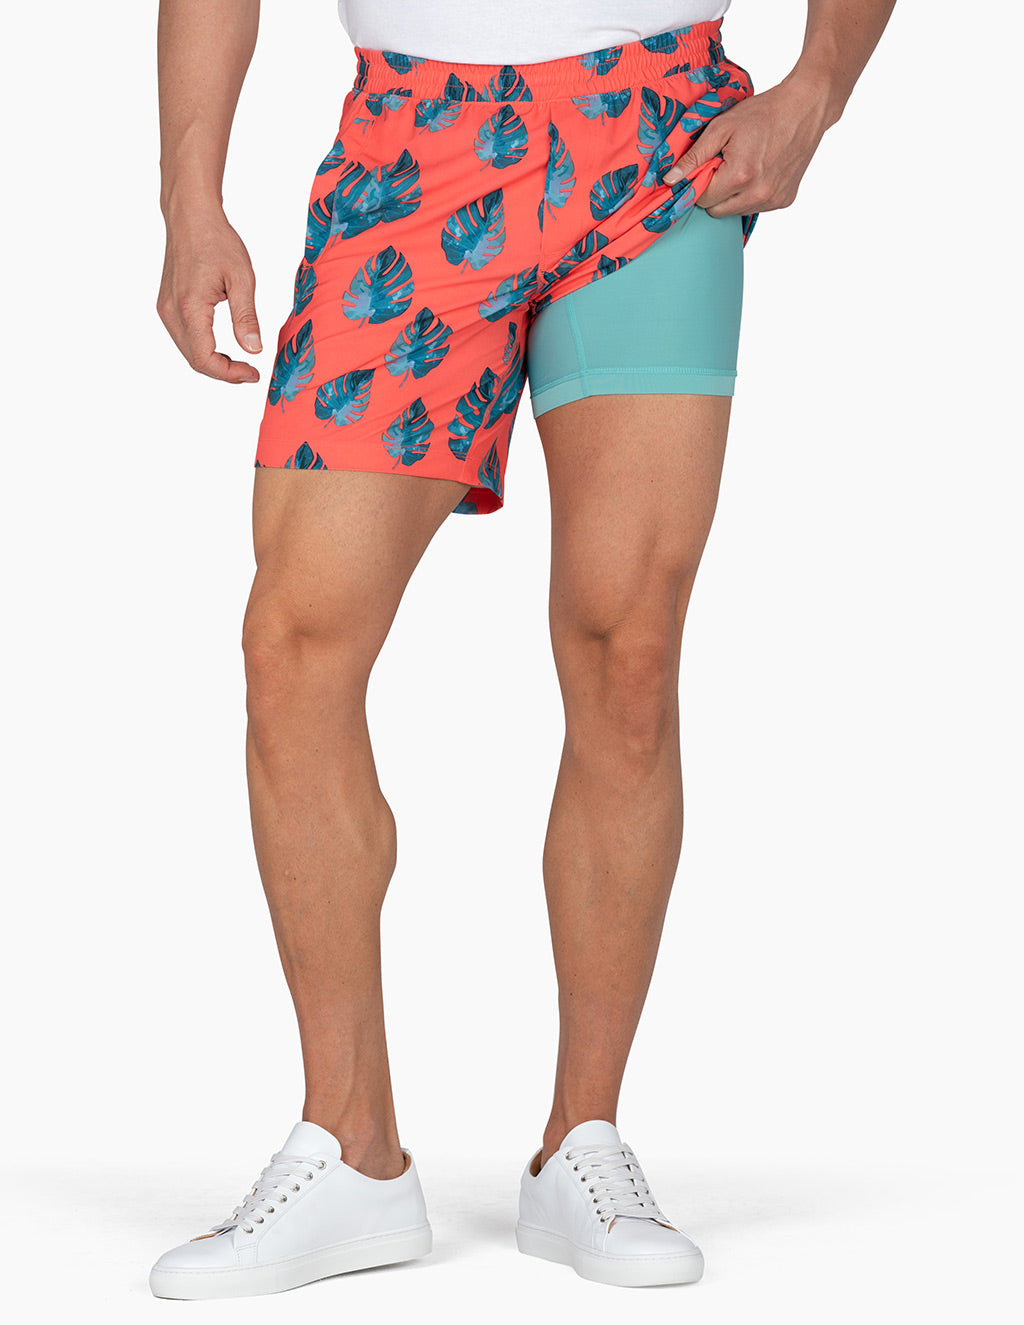 Golf Boxers - My Driver has a Stiff Shaft - Men's Naughty Boxer